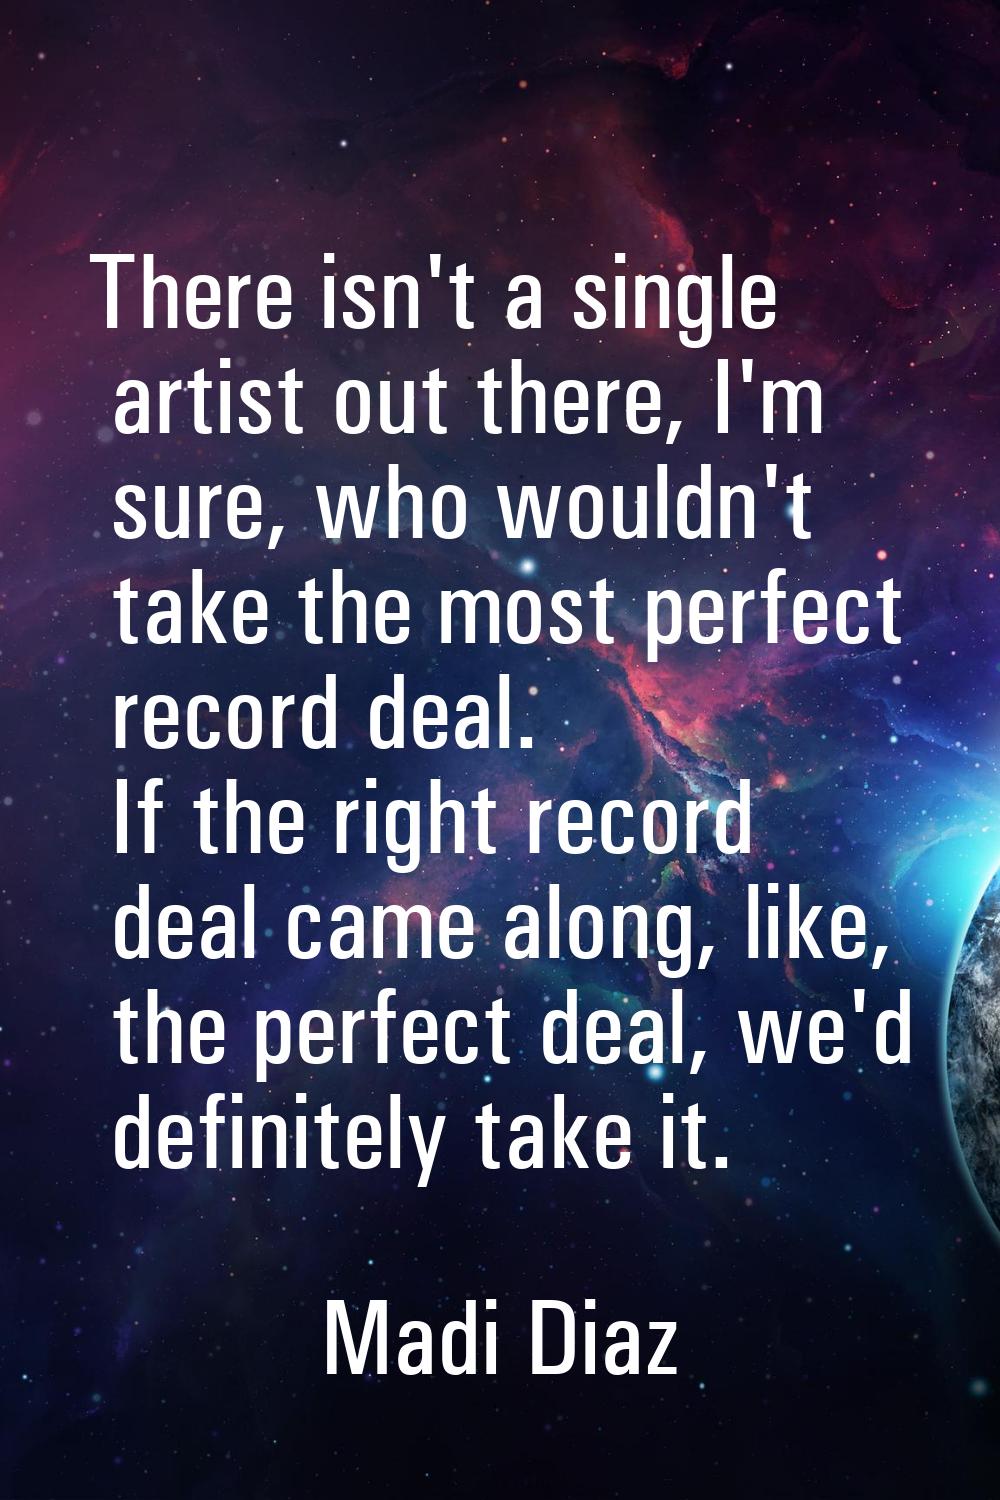 There isn't a single artist out there, I'm sure, who wouldn't take the most perfect record deal. If